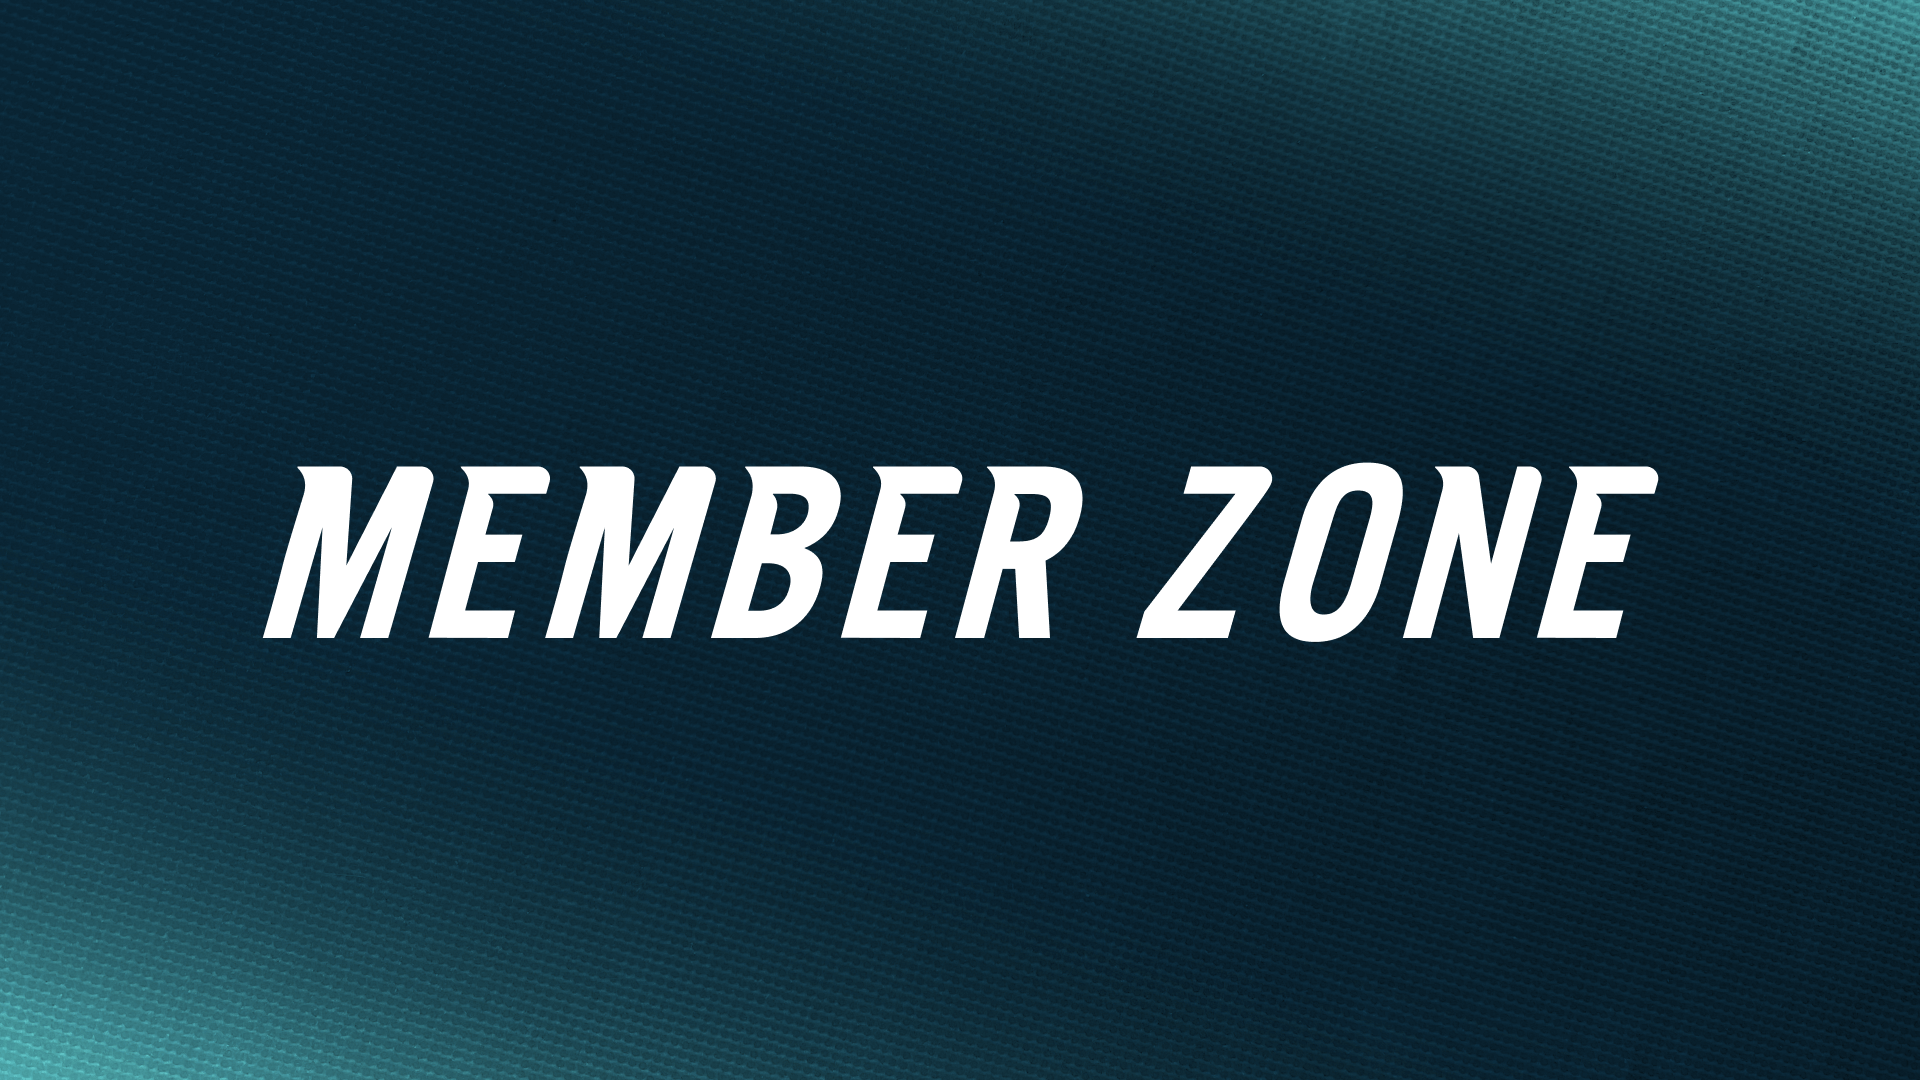 A graphic that says "Member Zone" and links to a page to learn more information about being a KC Current Season Ticket Member.